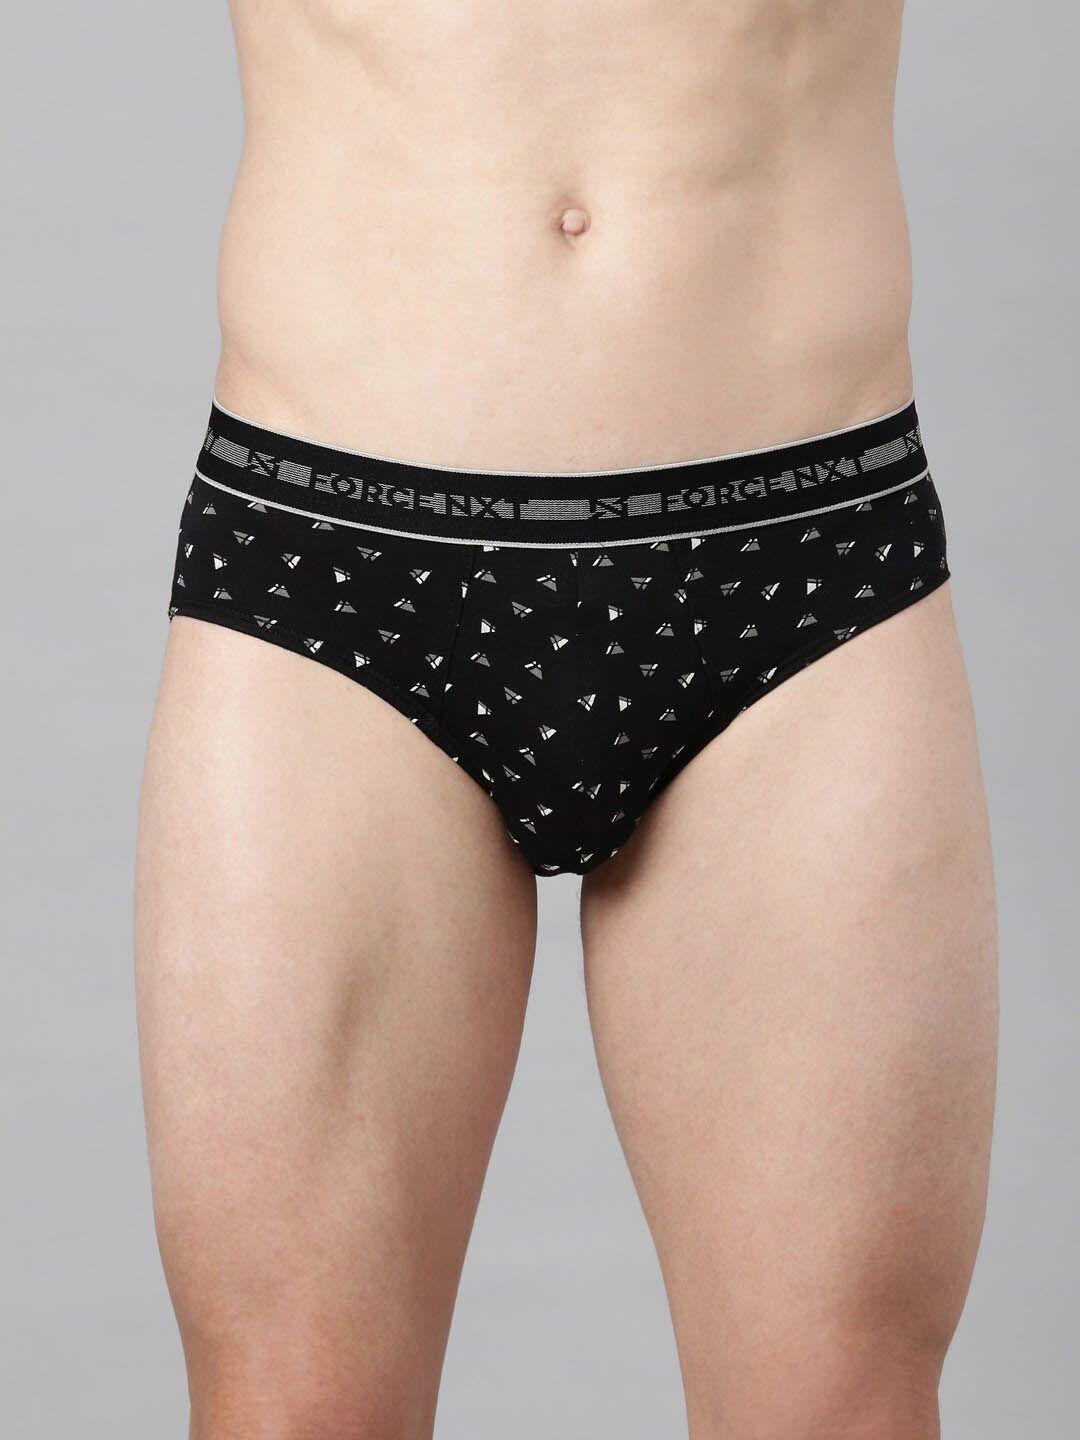 force-nxt-men-printed-super-combed-cotton-assorted-basic-briefs-mnff116